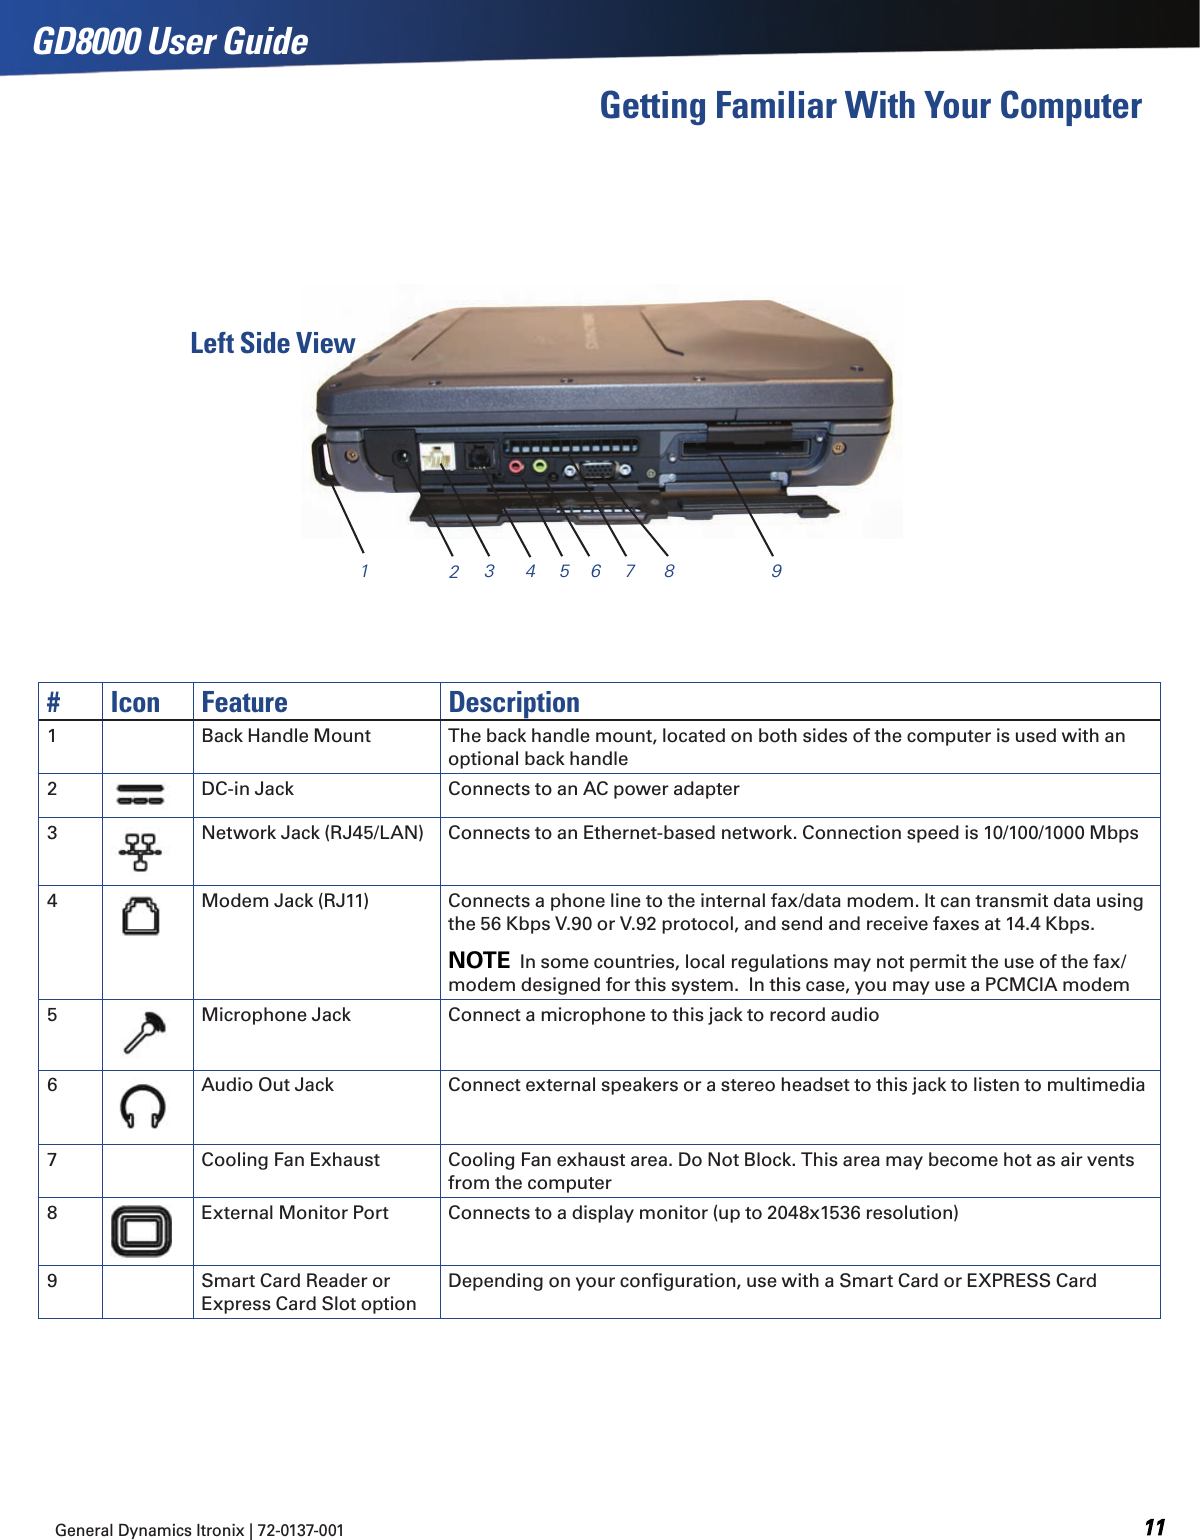 GD8000 User GuideGeneral Dynamics Itronix | 72-0137-001   # Icon Feature Description1 Back Handle Mount The back handle mount, located on both sides of the computer is used with an optional back handle2DC-in Jack Connects to an AC power adapter3Network Jack (RJ45/LAN) Connects to an Ethernet-based network. Connection speed is 10/100/1000 Mbps4Modem Jack (RJ11) Connects a phone line to the internal fax/data modem. It can transmit data using the 56 Kbps V.90 or V.92 protocol, and send and receive faxes at 14.4 Kbps.NOTE  In some countries, local regulations may not permit the use of the fax/modem designed for this system.  In this case, you may use a PCMCIA modem5Microphone Jack Connect a microphone to this jack to record audio6Audio Out Jack Connect external speakers or a stereo headset to this jack to listen to multimedia7 Cooling Fan Exhaust Cooling Fan exhaust area. Do Not Block. This area may become hot as air vents from the computer8External Monitor Port Connects to a display monitor (up to 2048x1536 resolution)9 Smart Card Reader or Express Card Slot optionDepending on your conﬁguration, use with a Smart Card or EXPRESS Card123 4 5 6 7 8 9Getting Familiar With Your ComputerLeft Side View